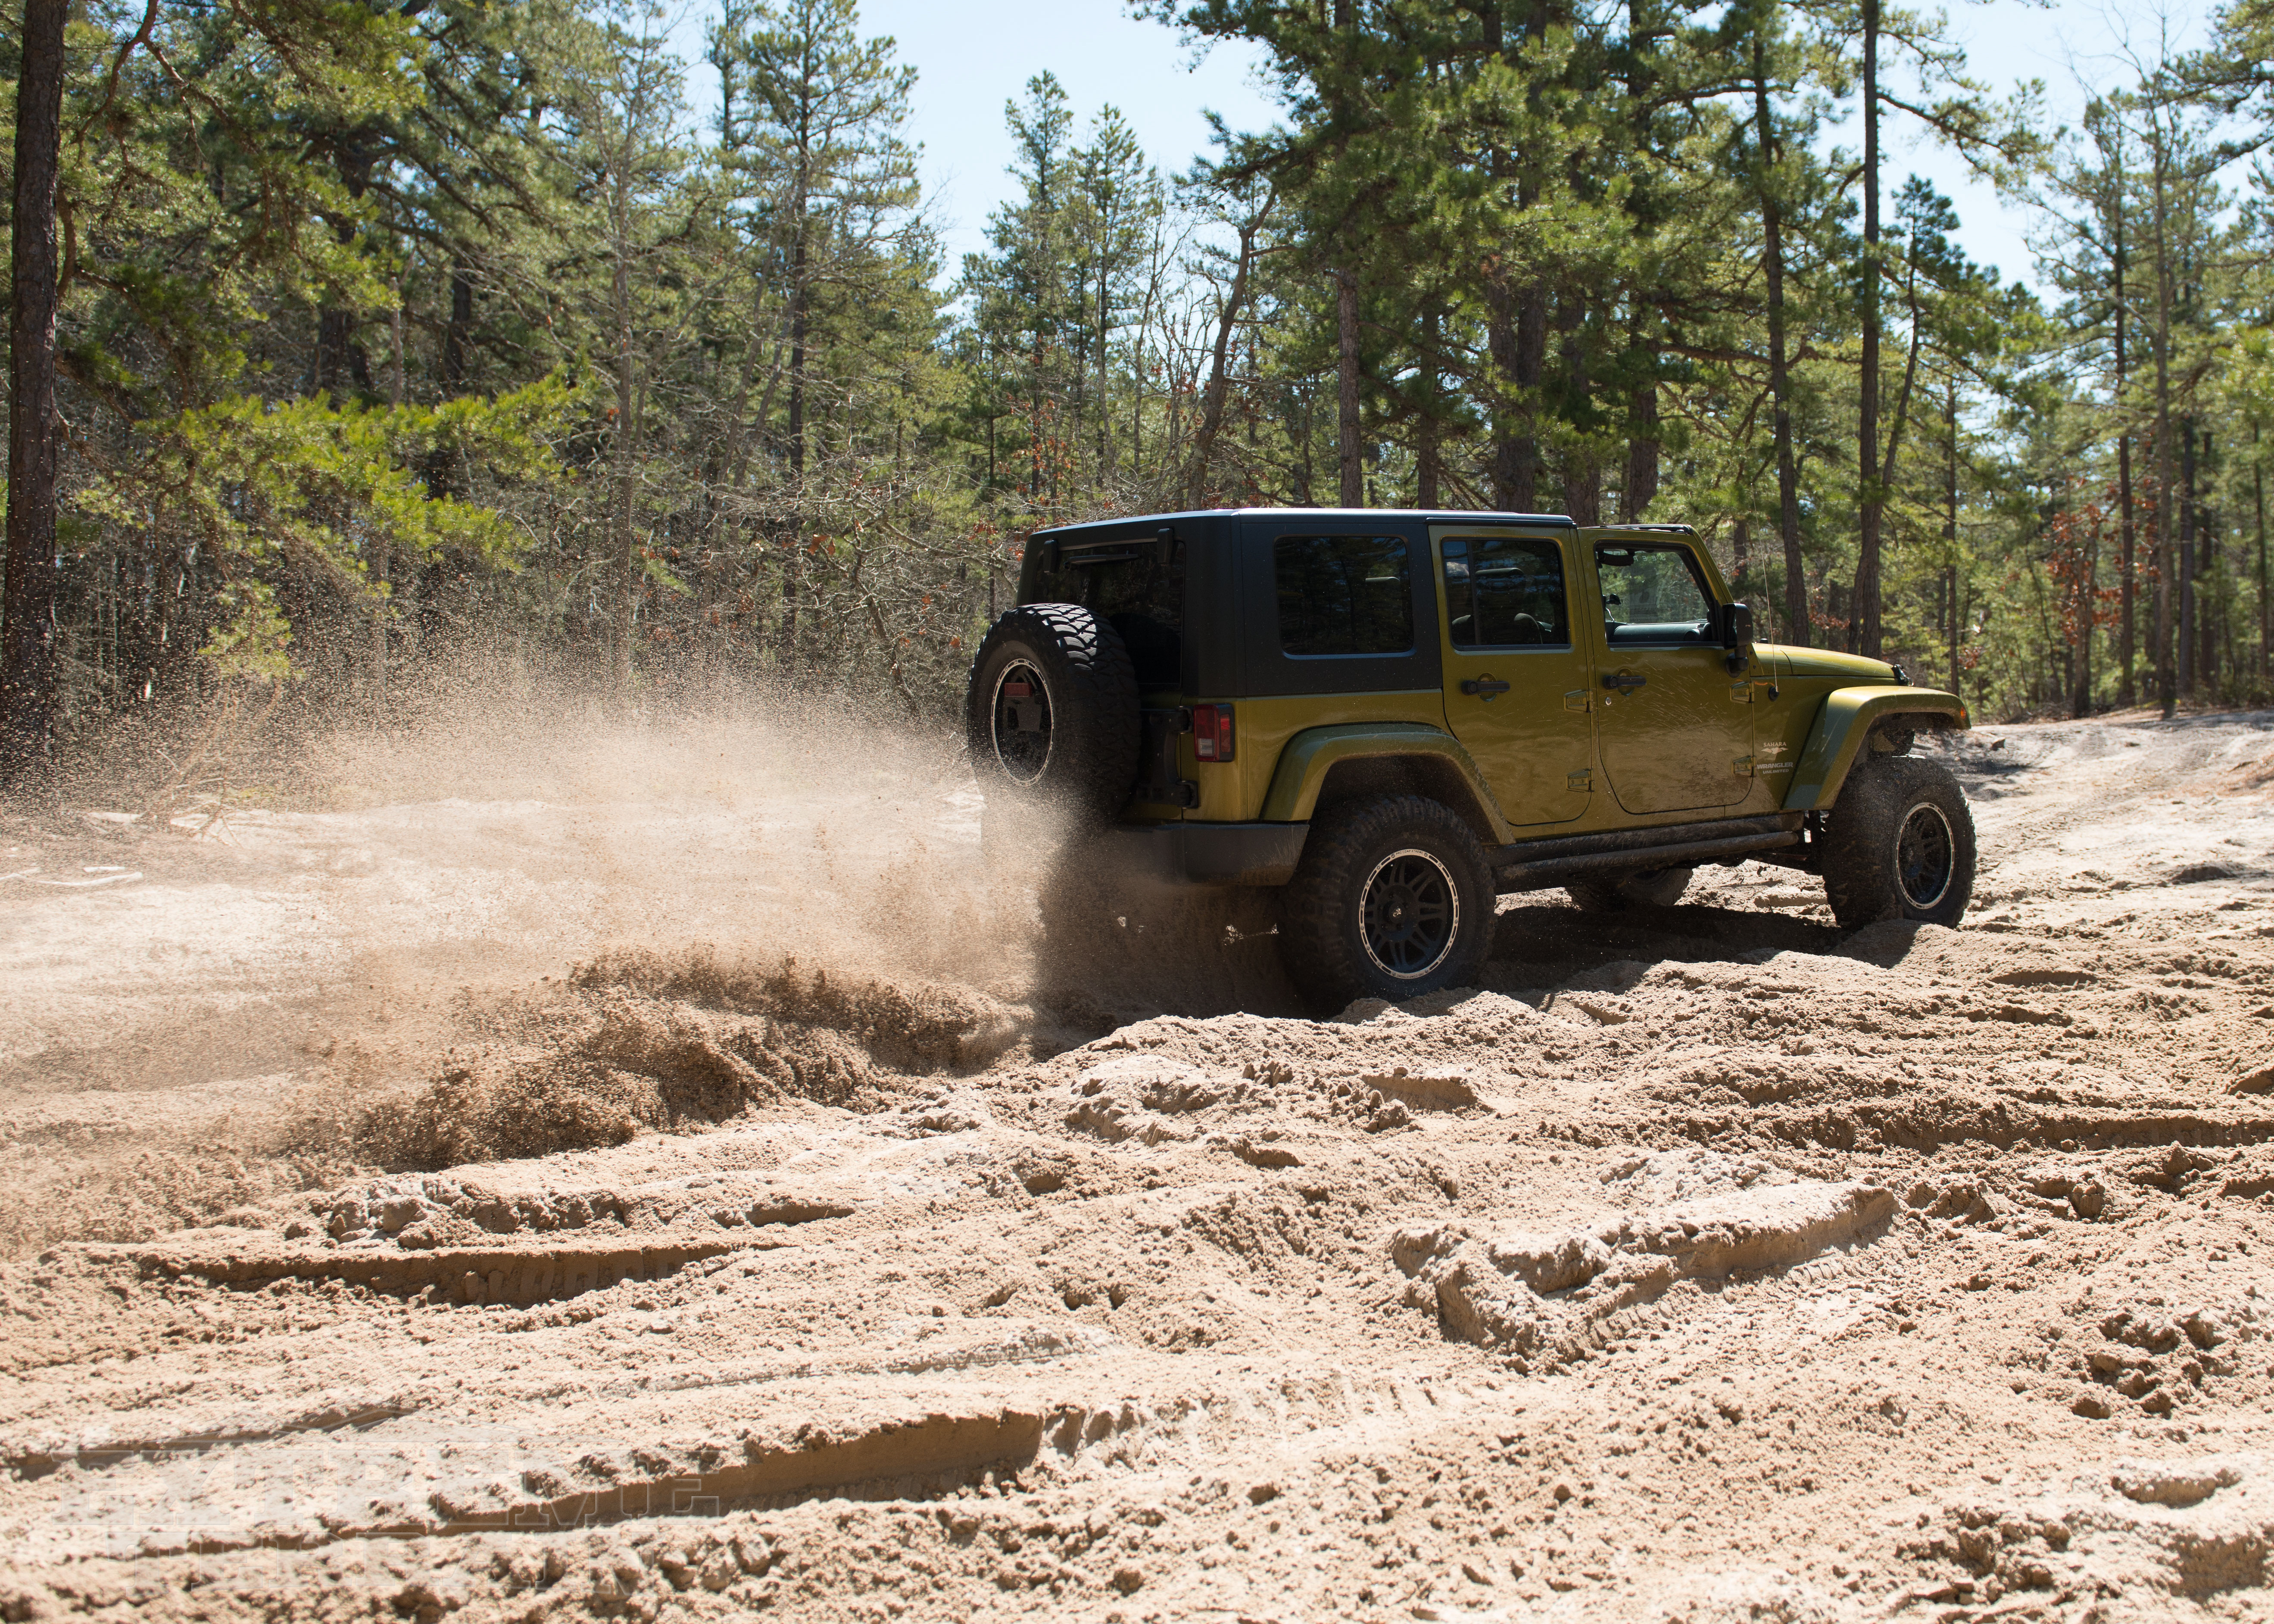 JK Wrangler Creating a Rooster Tail